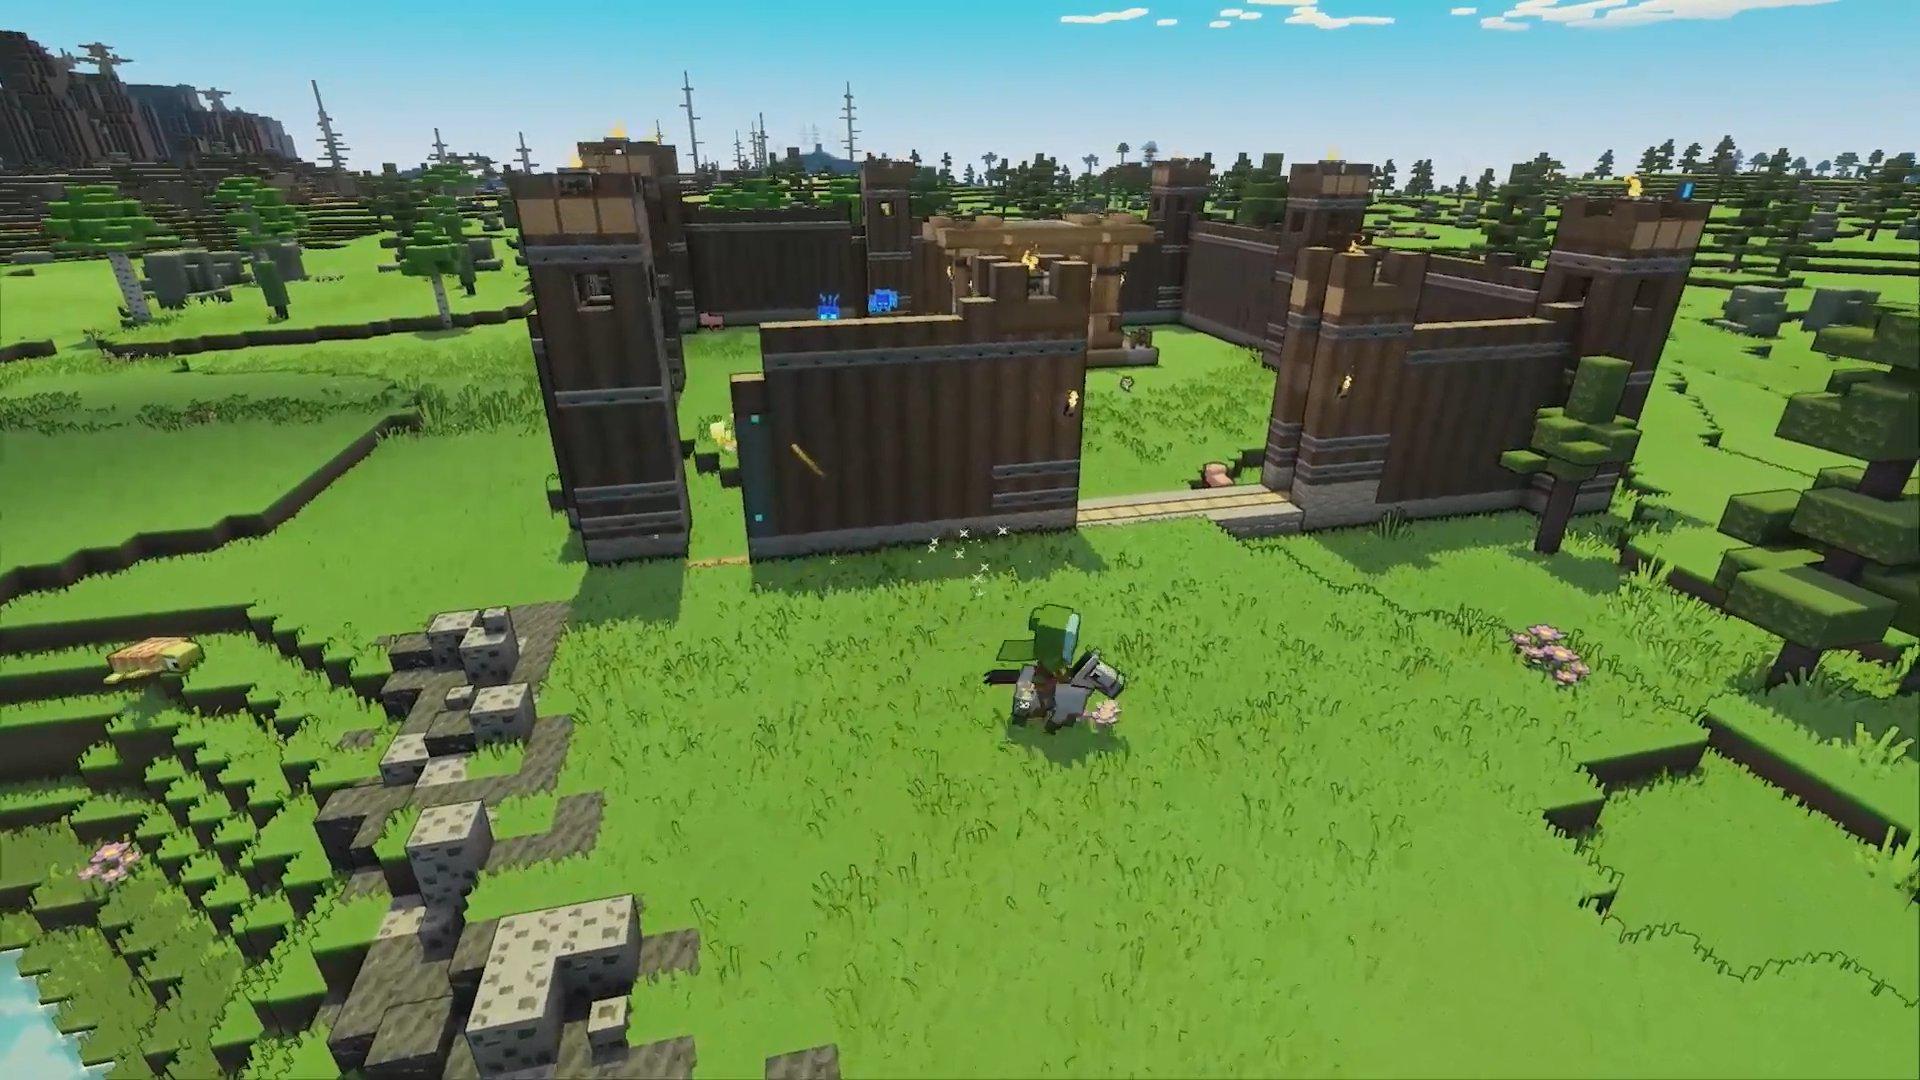 Mojang announces Minecraft Legends release date during Xbox showcase